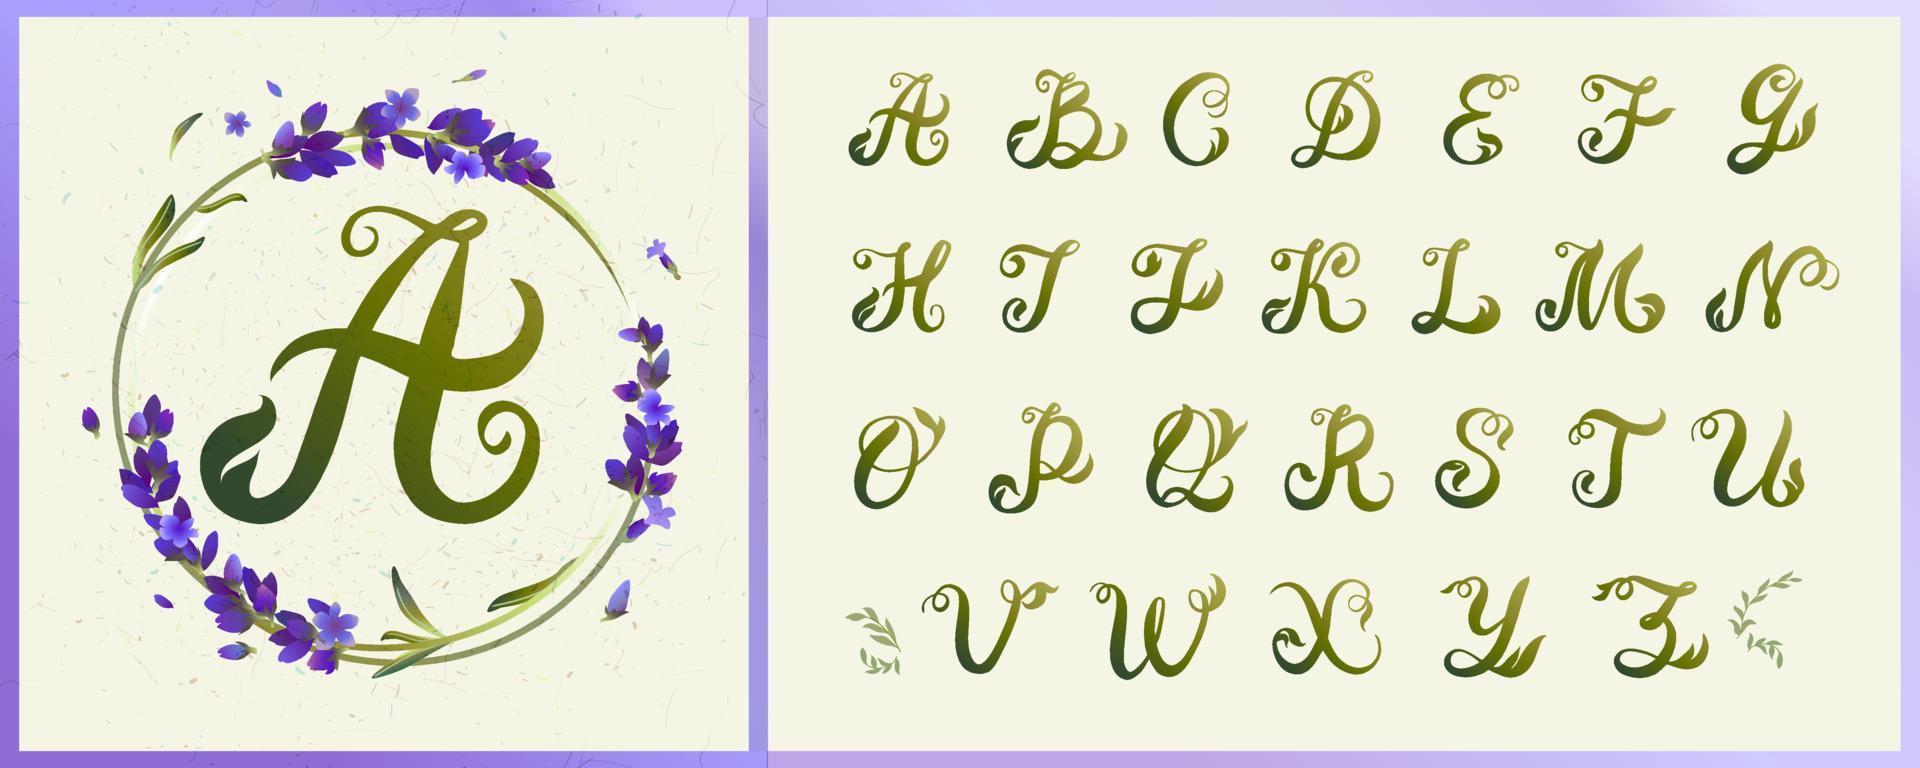 alphabet uppercase letters from green leaves, wreath of lavender flowers. vector